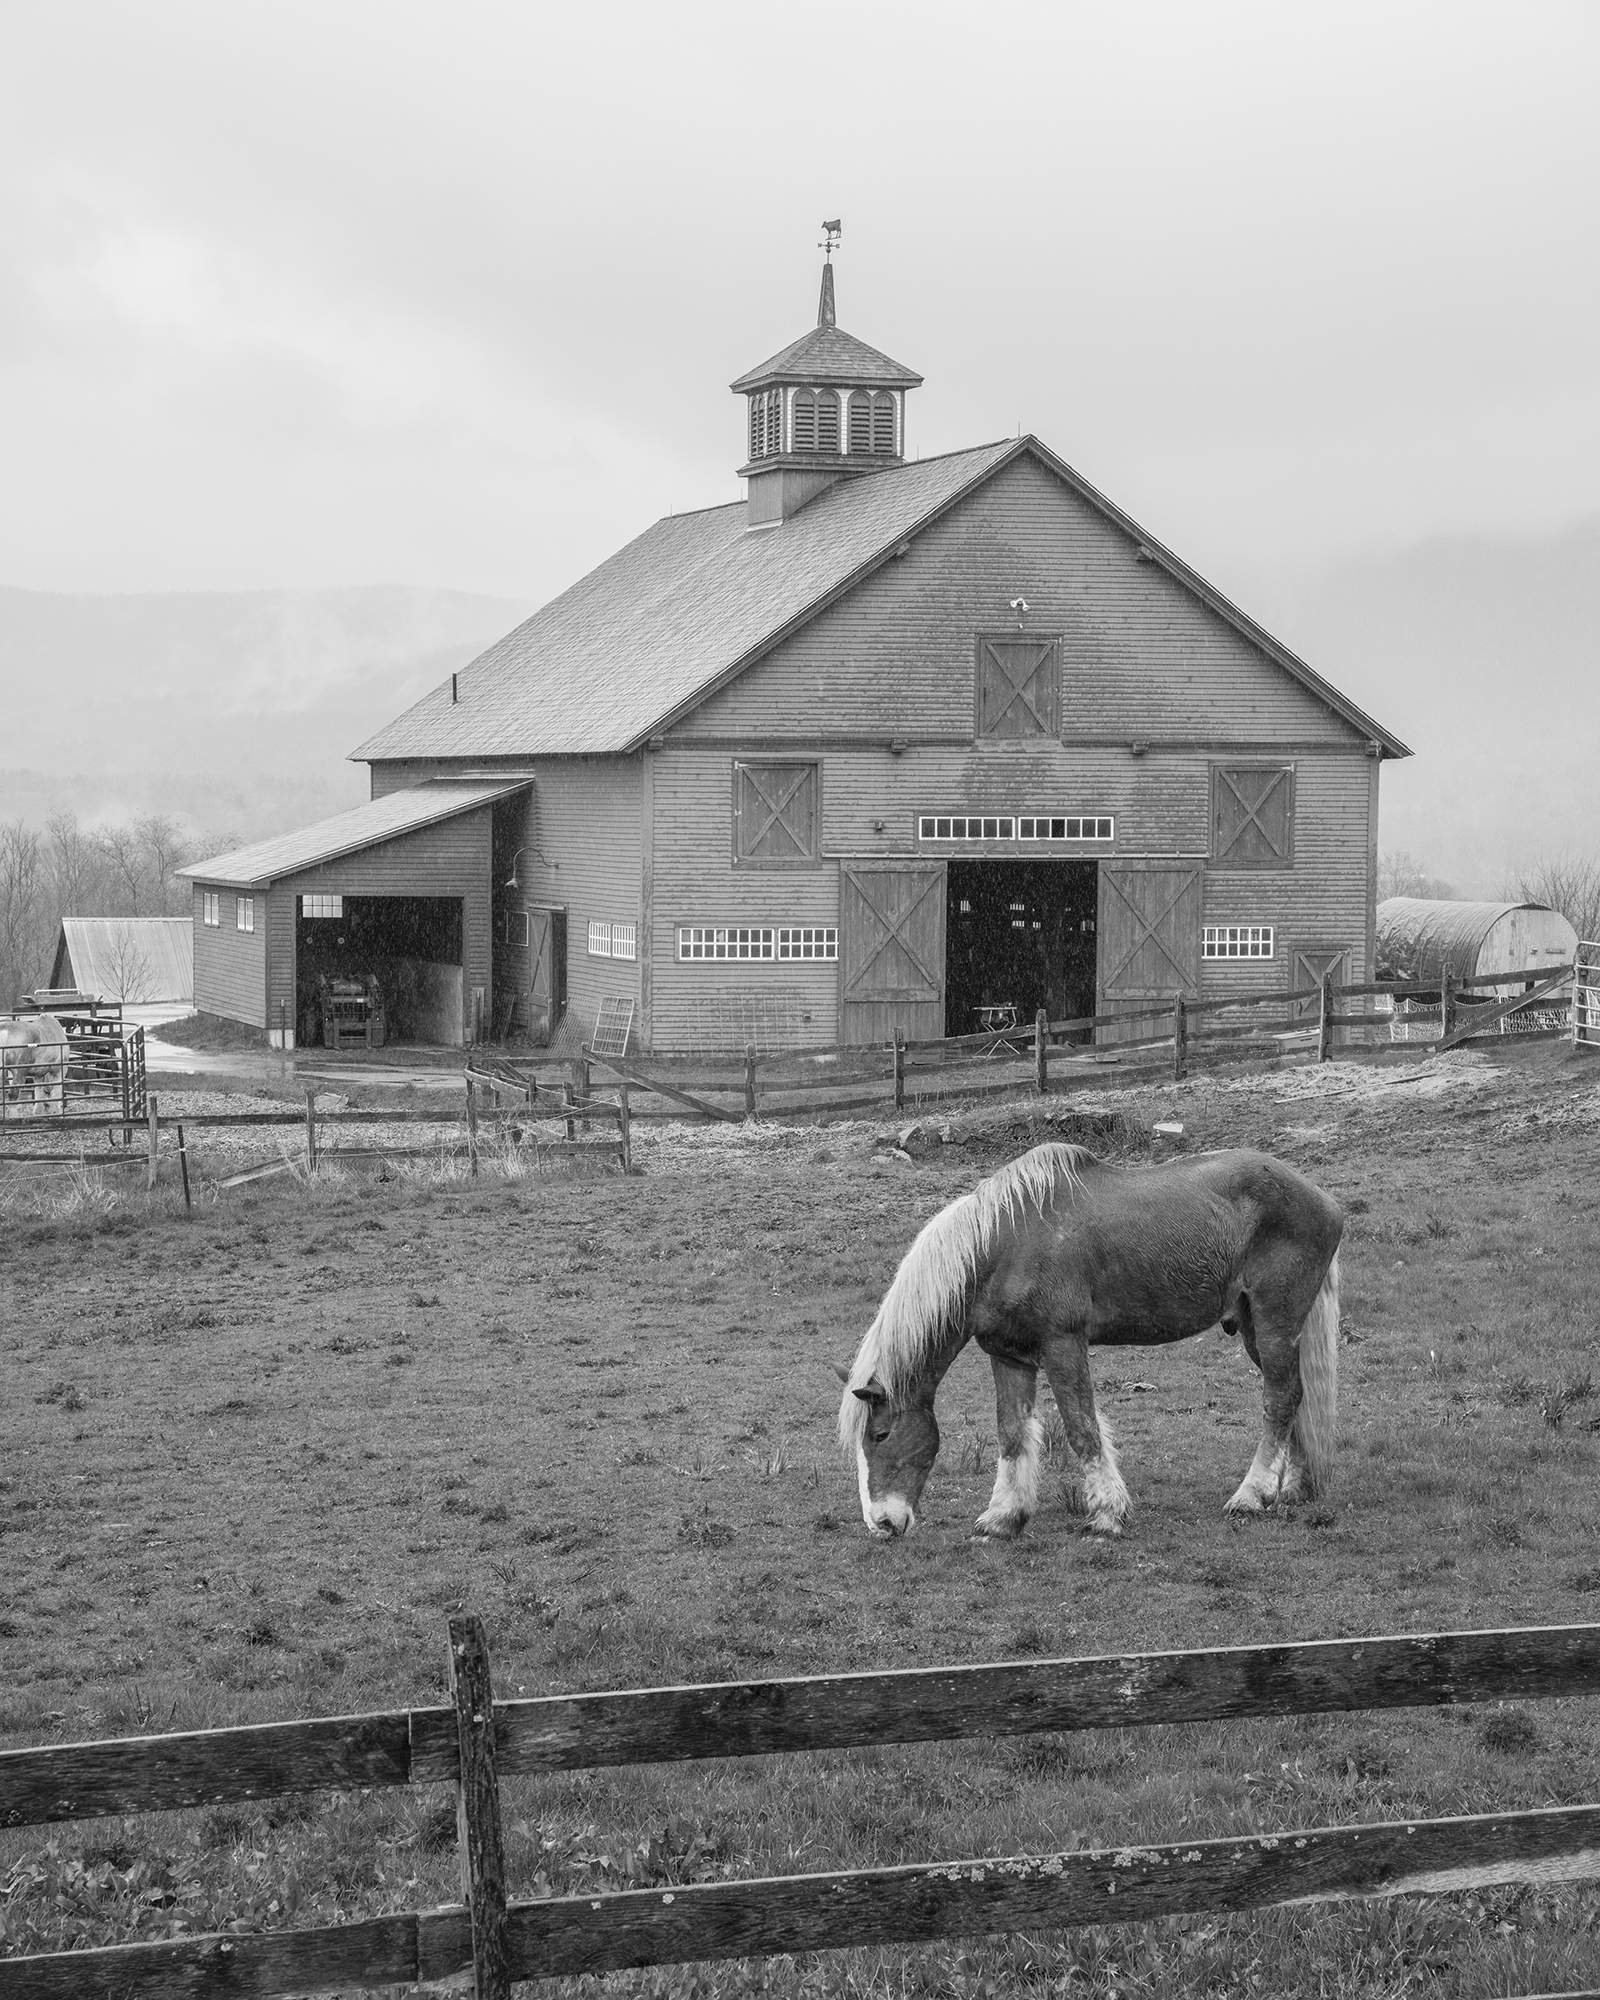 NMH farm and horse - Gill / Photograph by Charles Abel